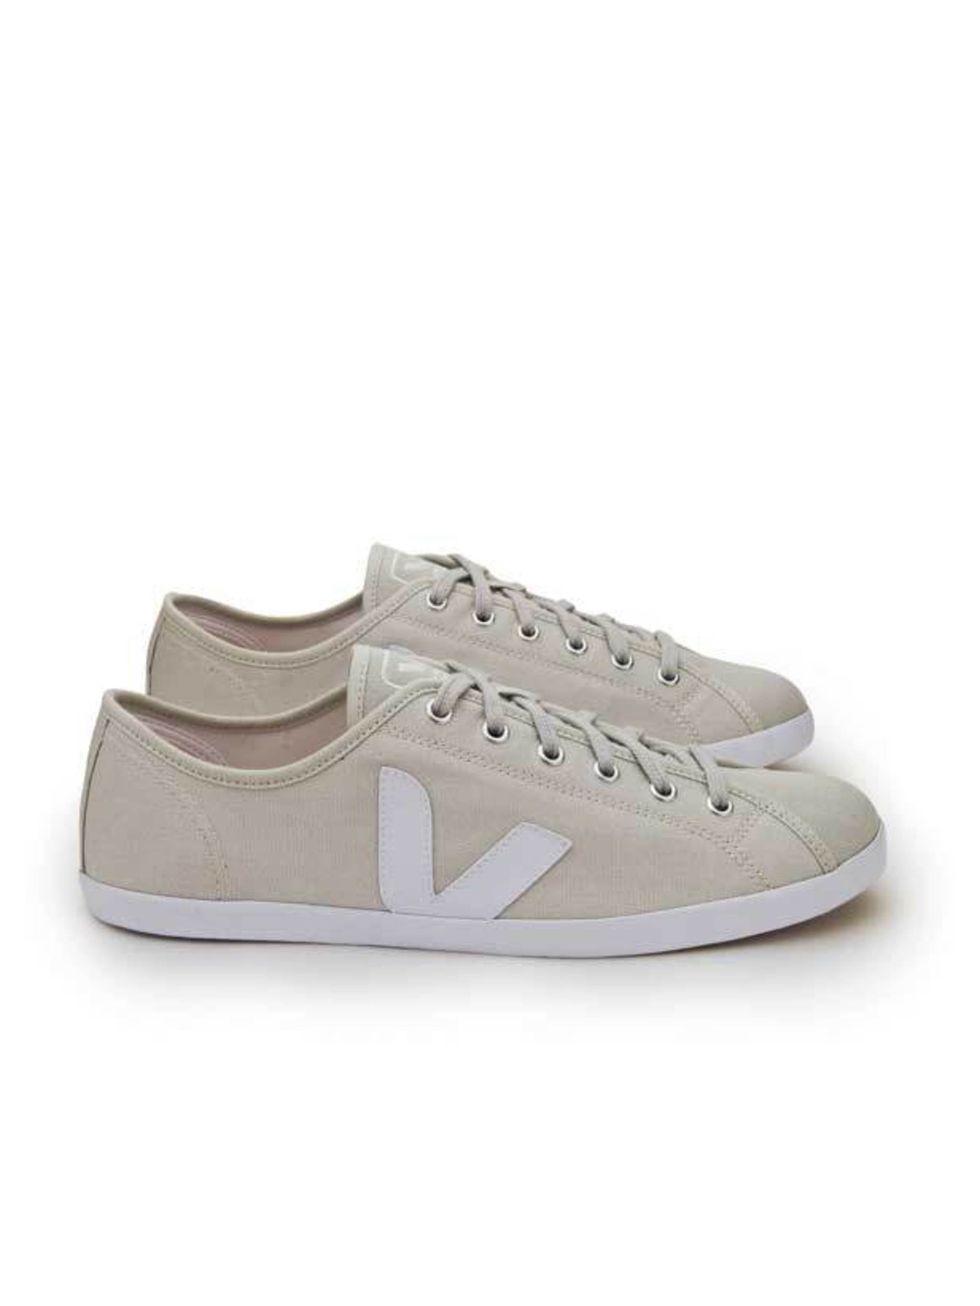 <p>Veja canvas trainers, £59.99, at <a href="http://www.offspring.co.uk/perl/go.pl/style.htm?style_uid=5851&amp;color_uid=15903">Offspring</a></p>